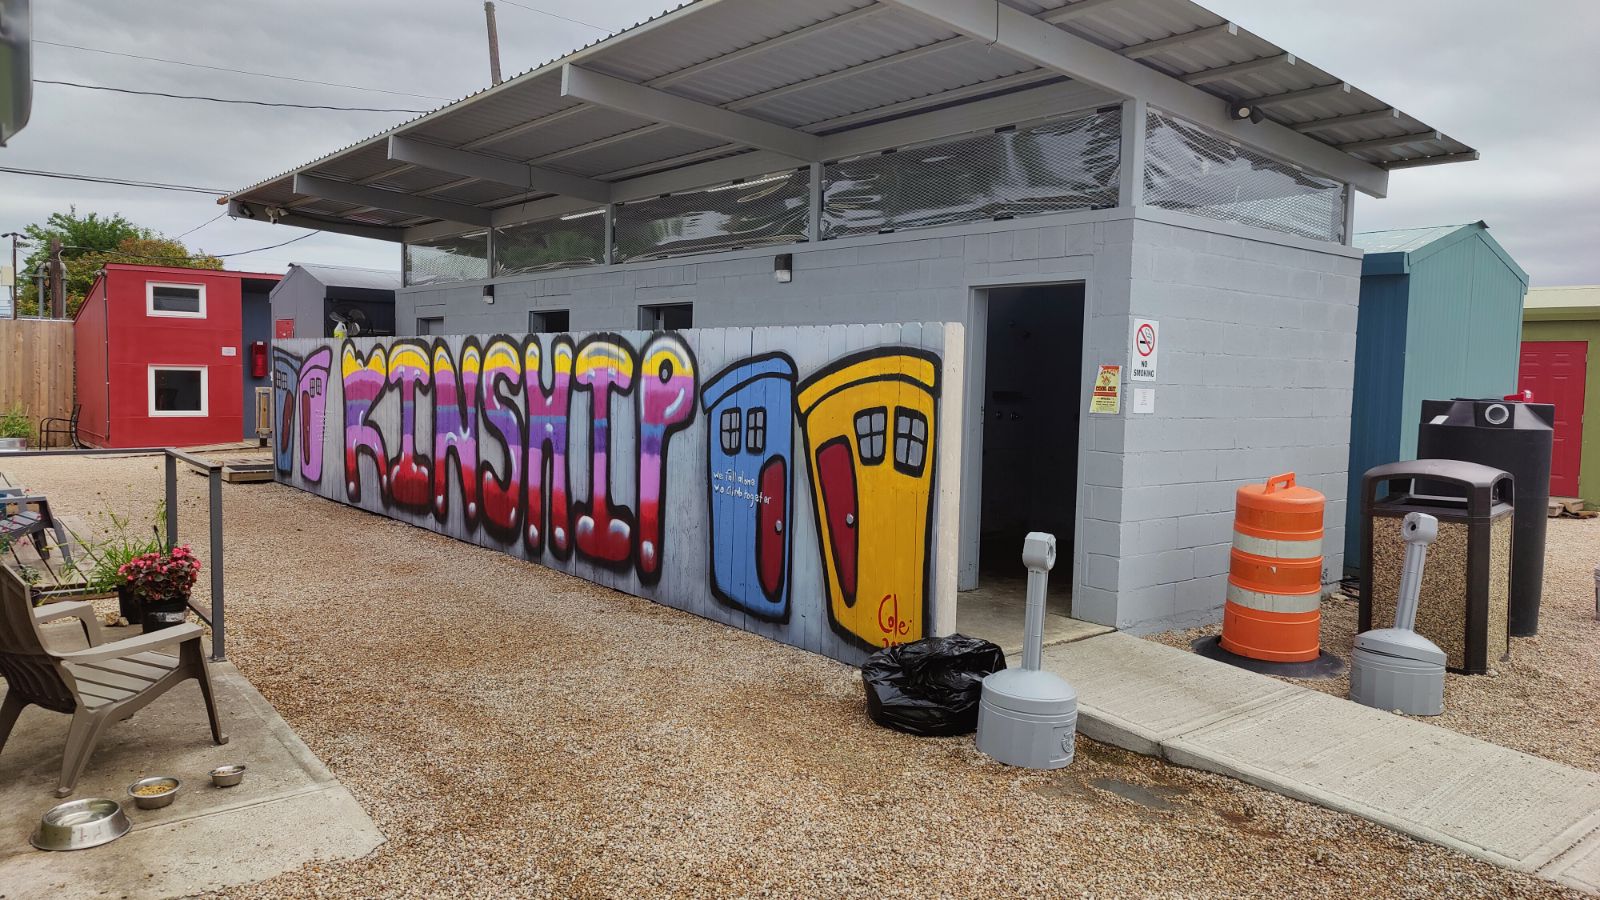 Hygiene facility with a mural on one wall that says "kinship" with painted houses